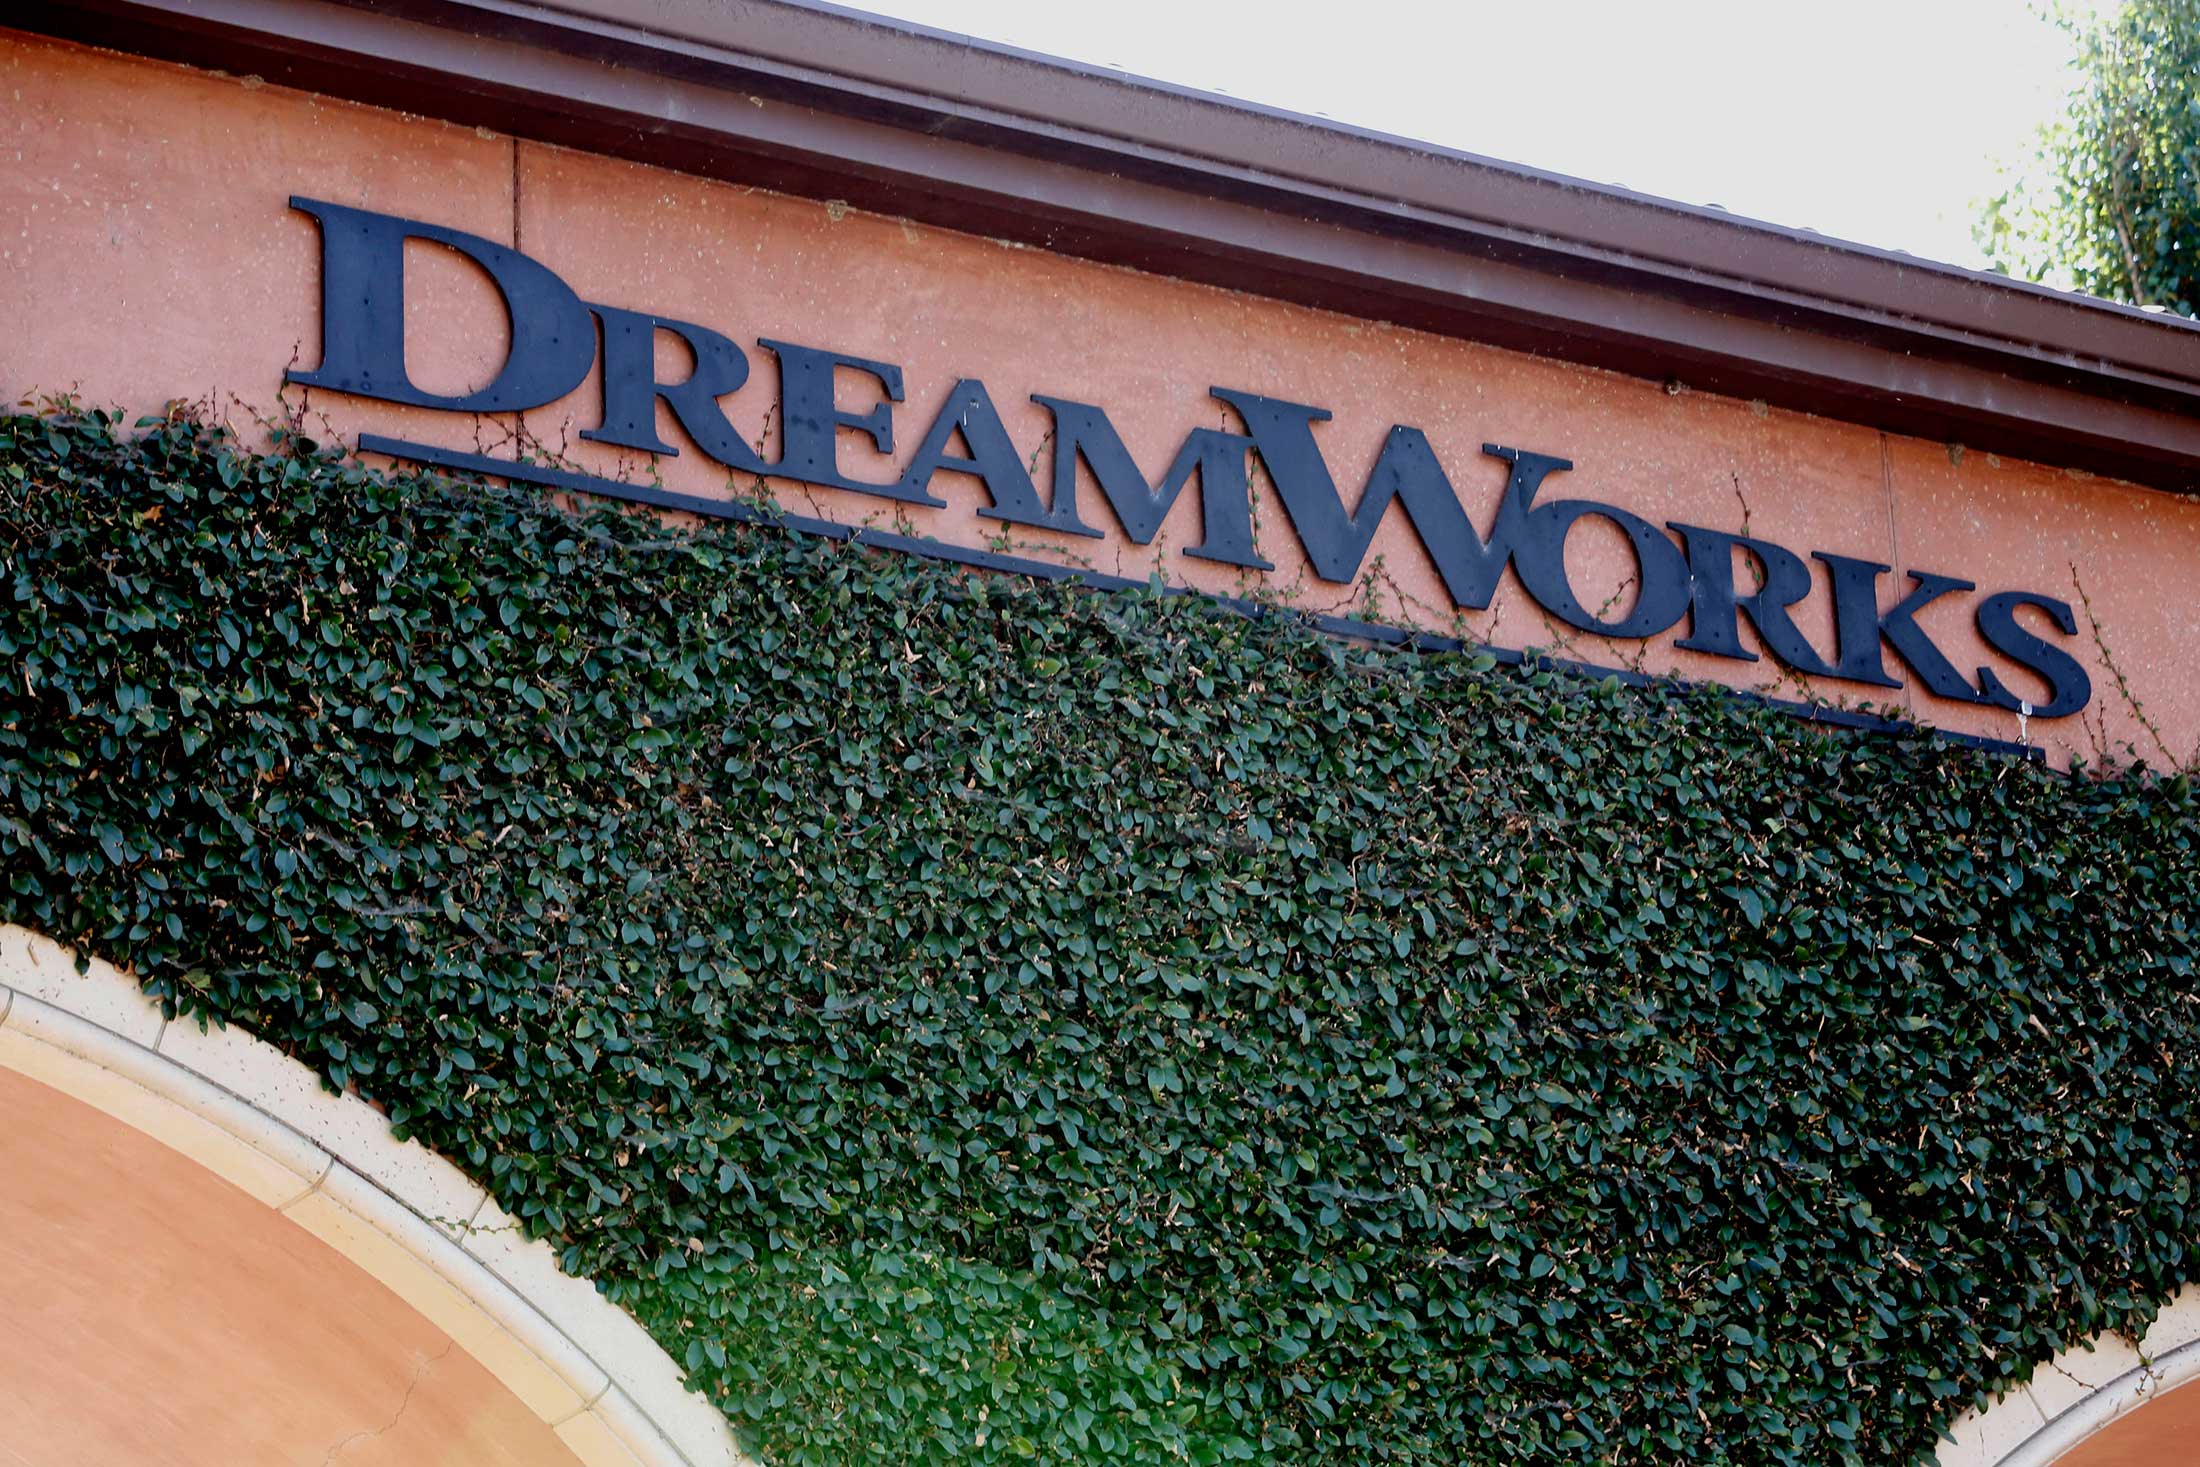 DreamWorks Animation SKG Inc. signage is displayed in the courtyard of the company's headquarters in Glendale, California, U.S., on Monday, July 15, 2013.
